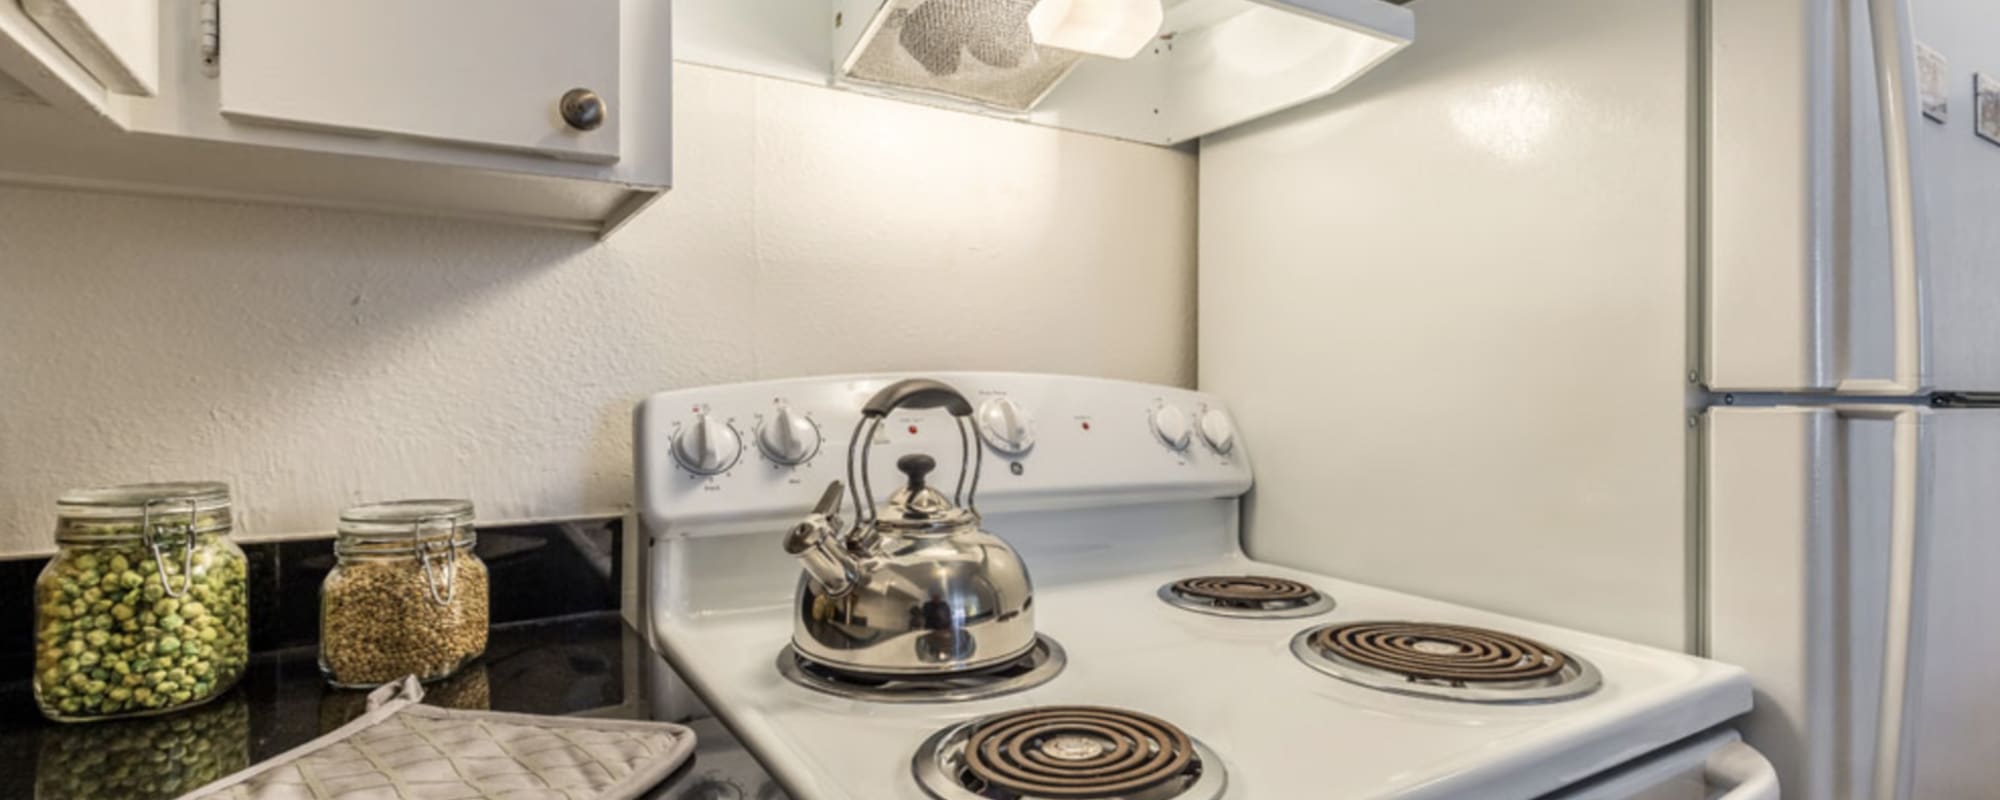 Appliances in a modern kitchen at Lakewood Apartments at Lake Merced in San Francisco, California